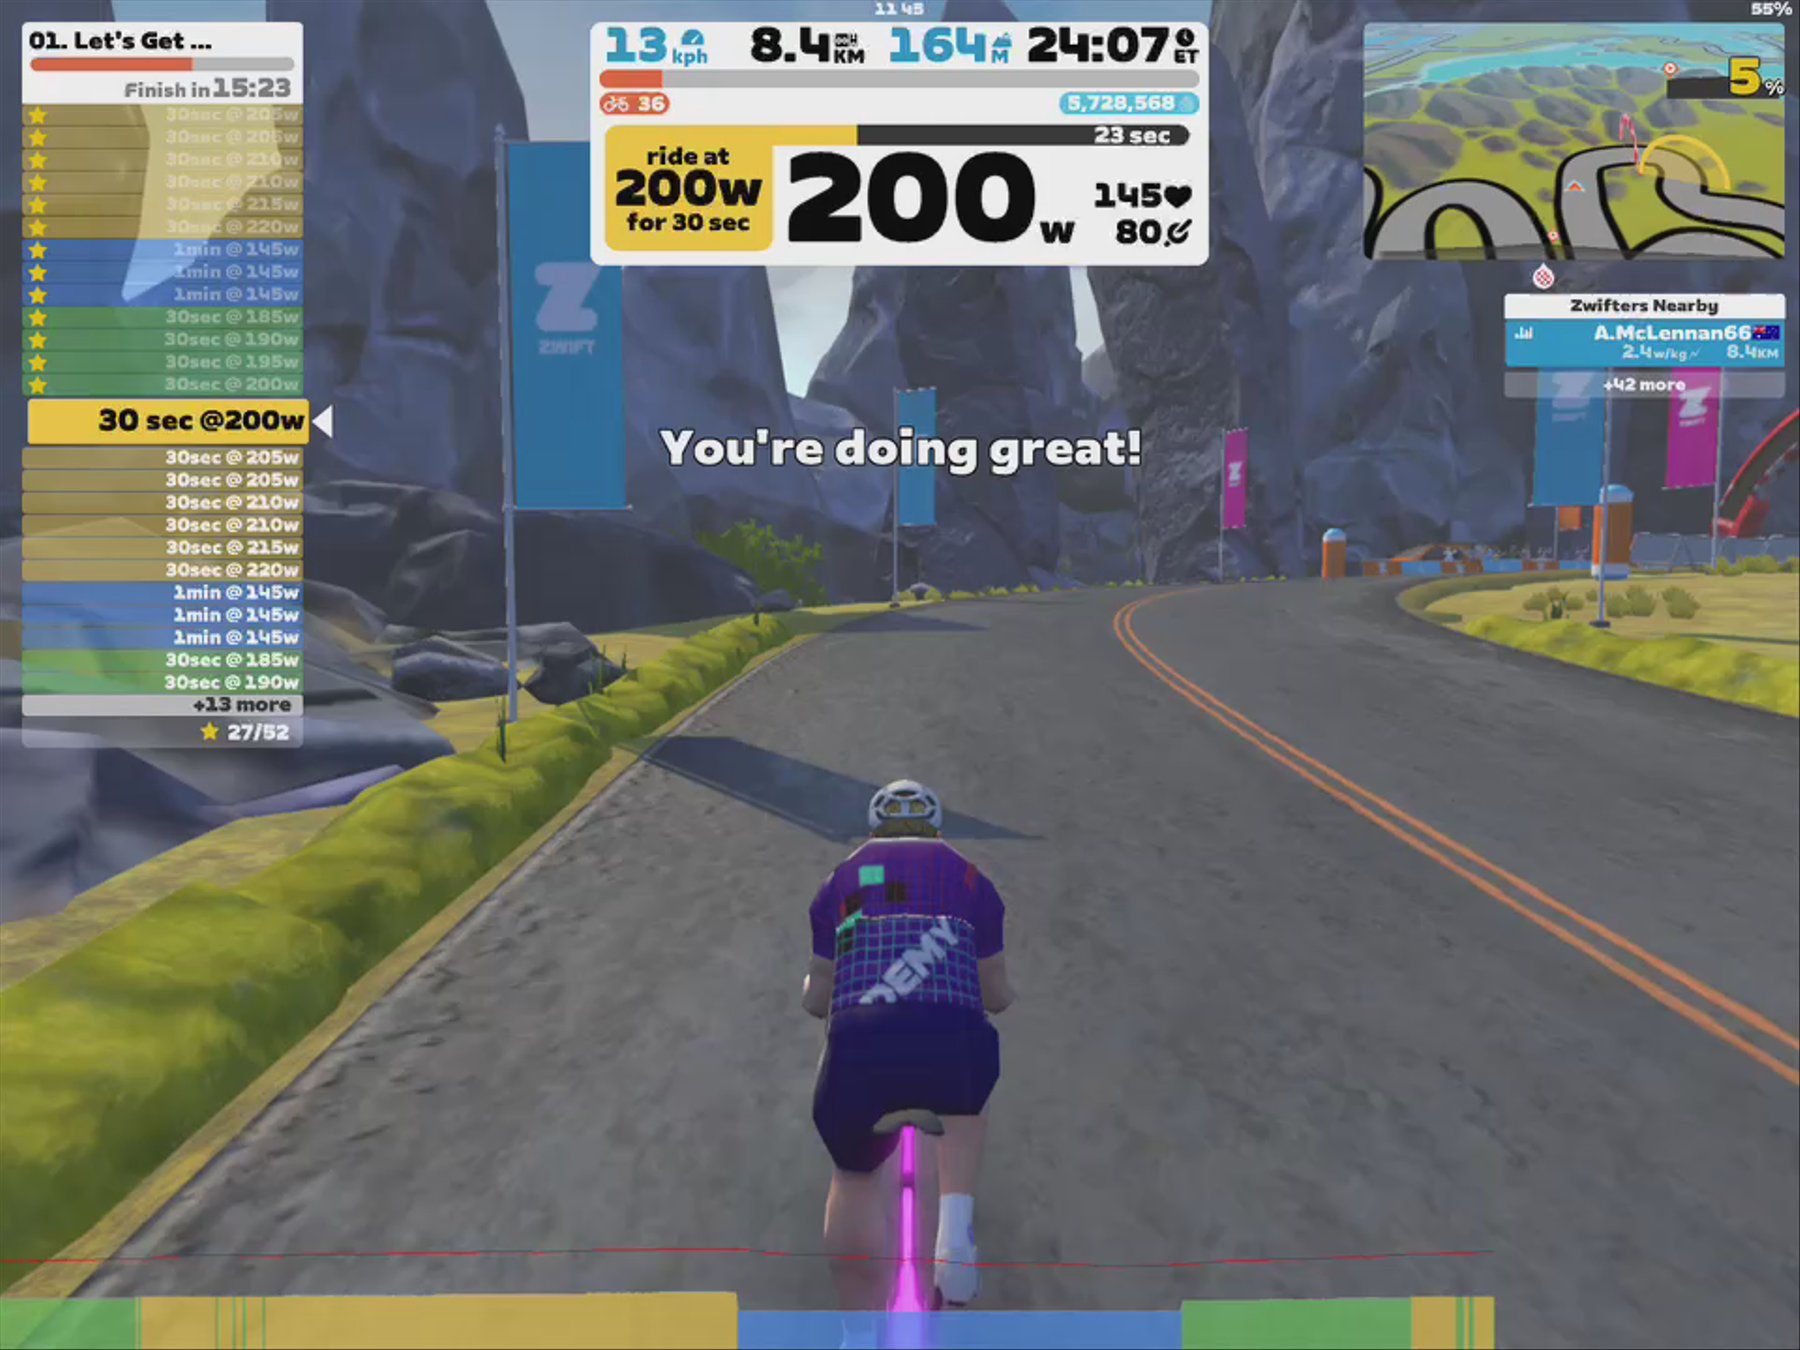 Zwift - 01. Let's Get Moving in Scotland